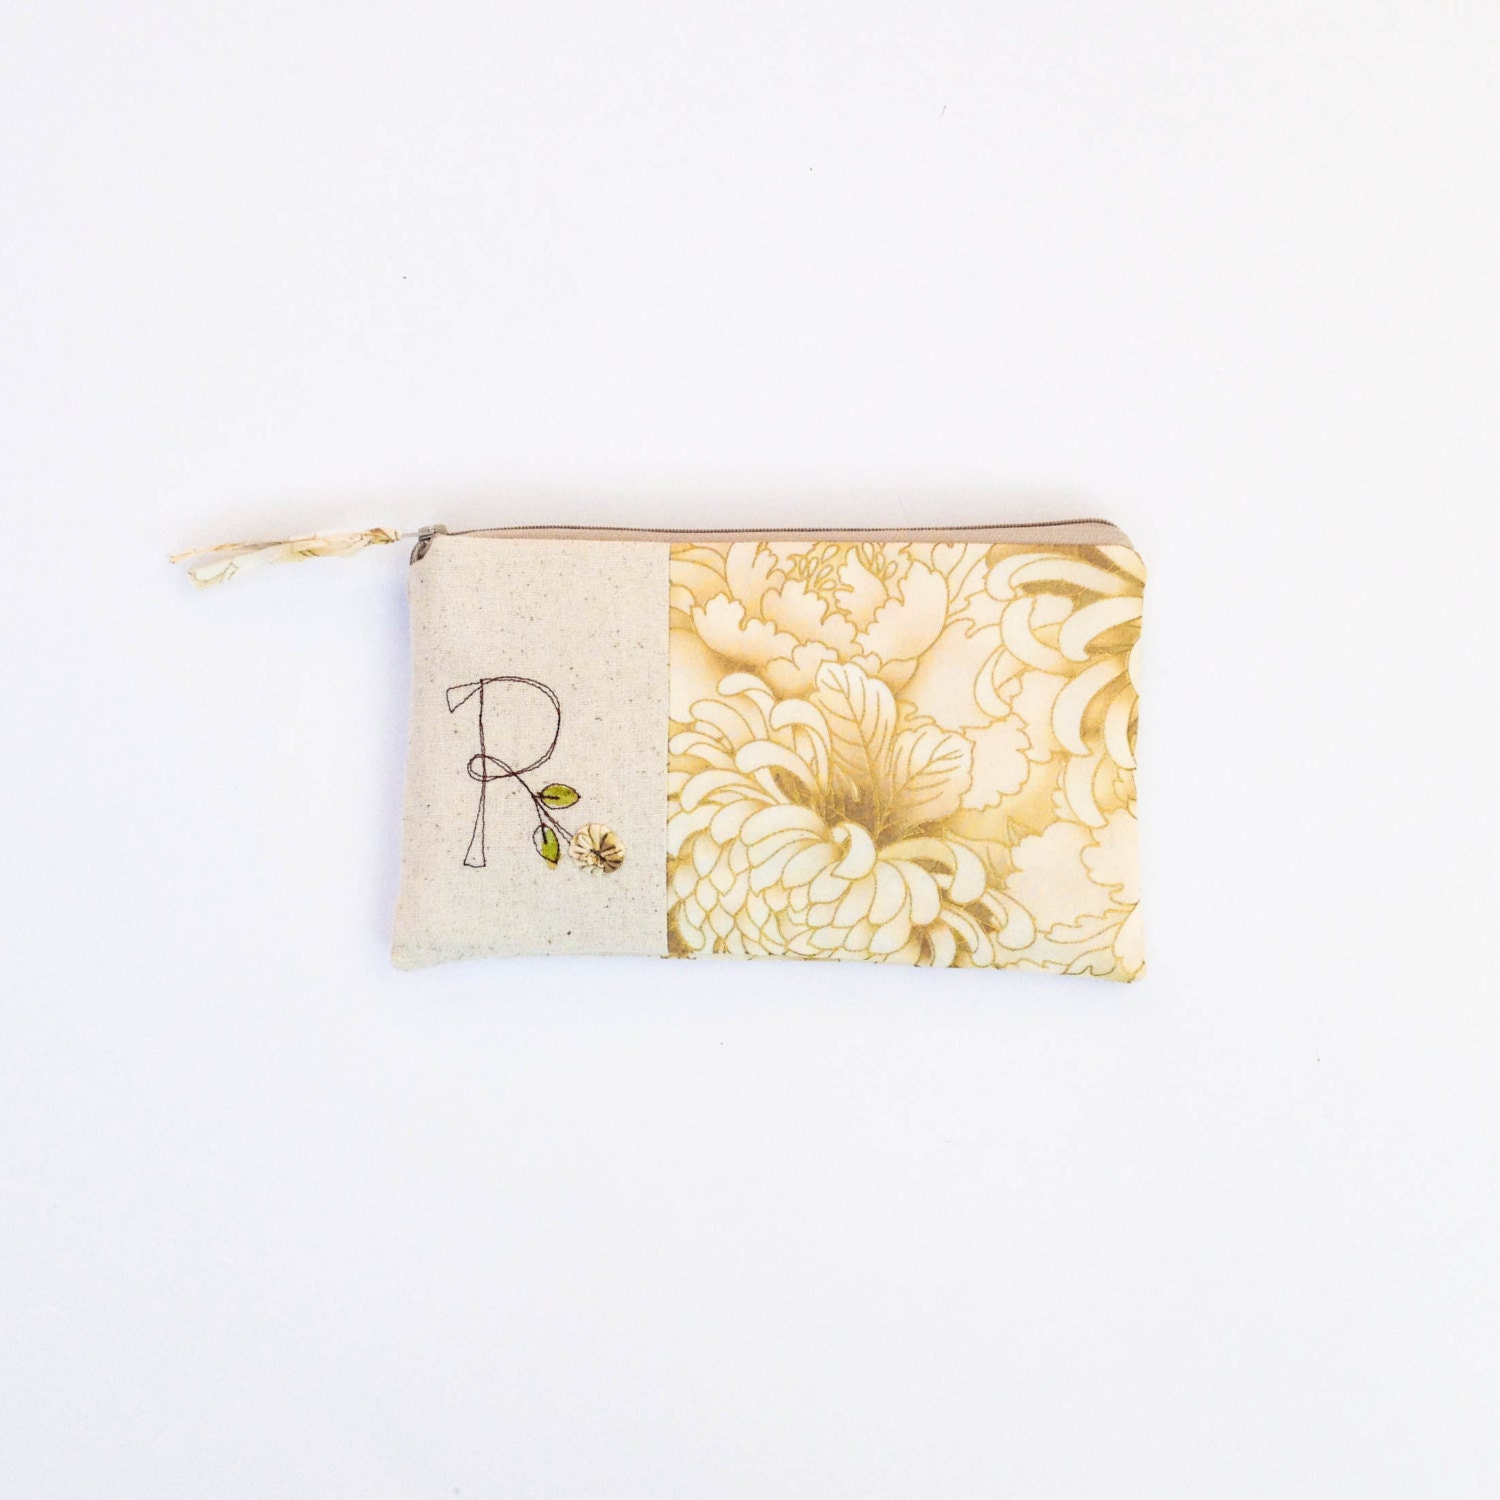 gold and white floral initial clutch, evening handbag, bridal wedding purse, letter R, MADE to ORDER by mamableudesigns - mamableudesigns